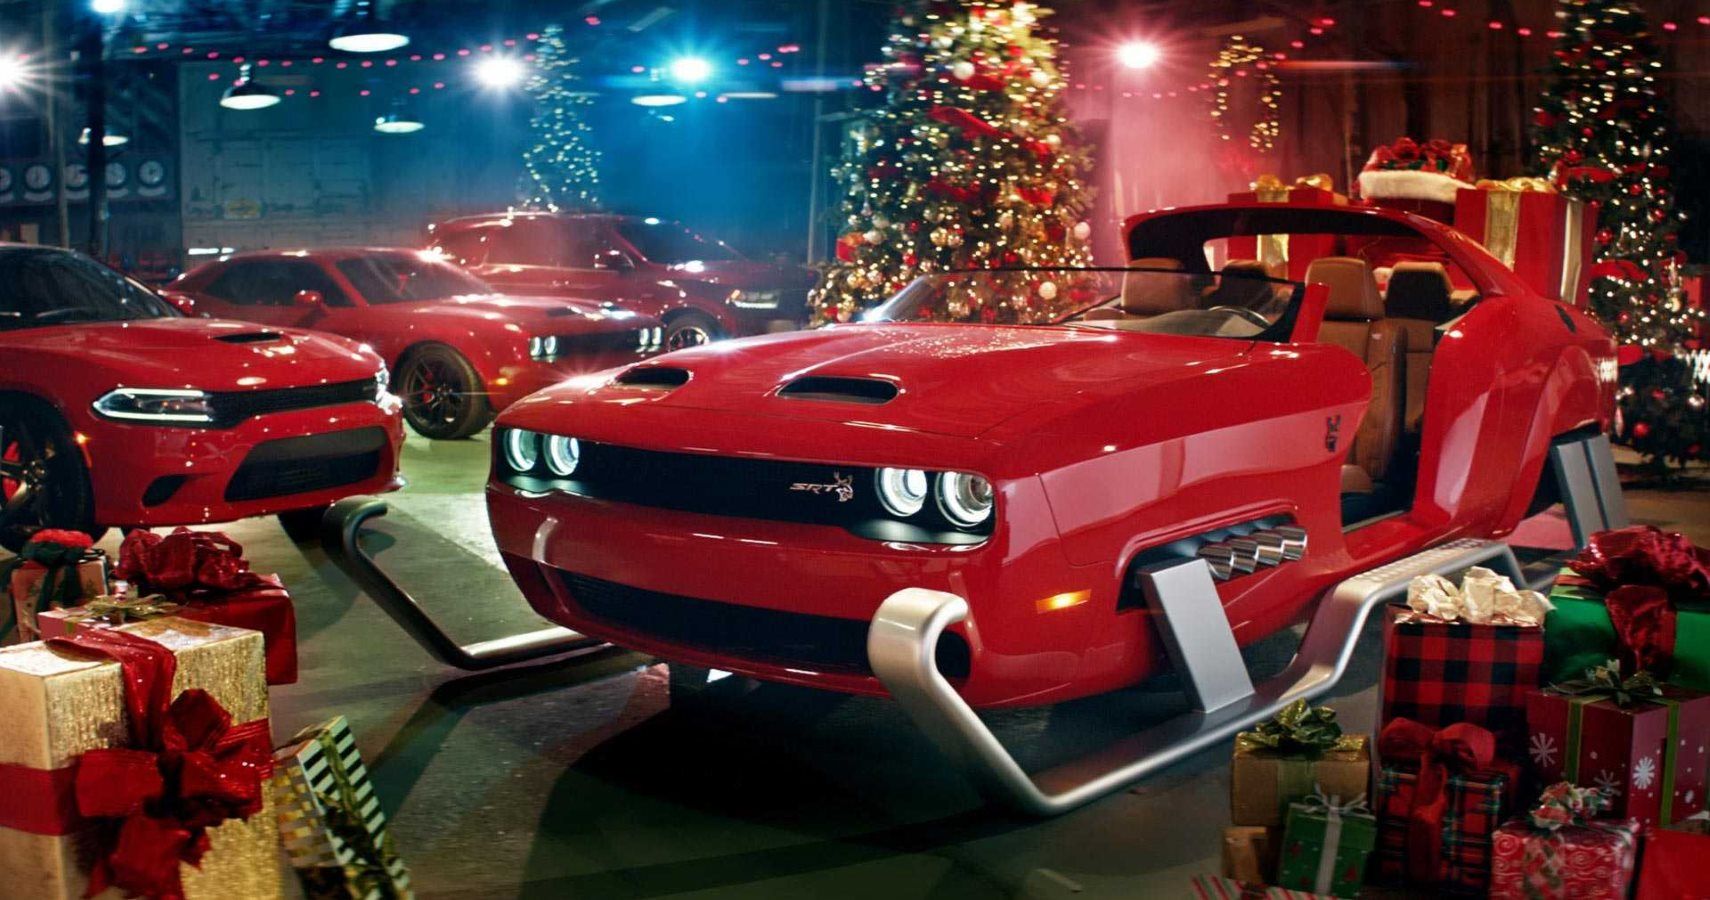 Dodge's Holiday Ad For The Challenger SRT Redeye Makes Santa's Sleigh Cool